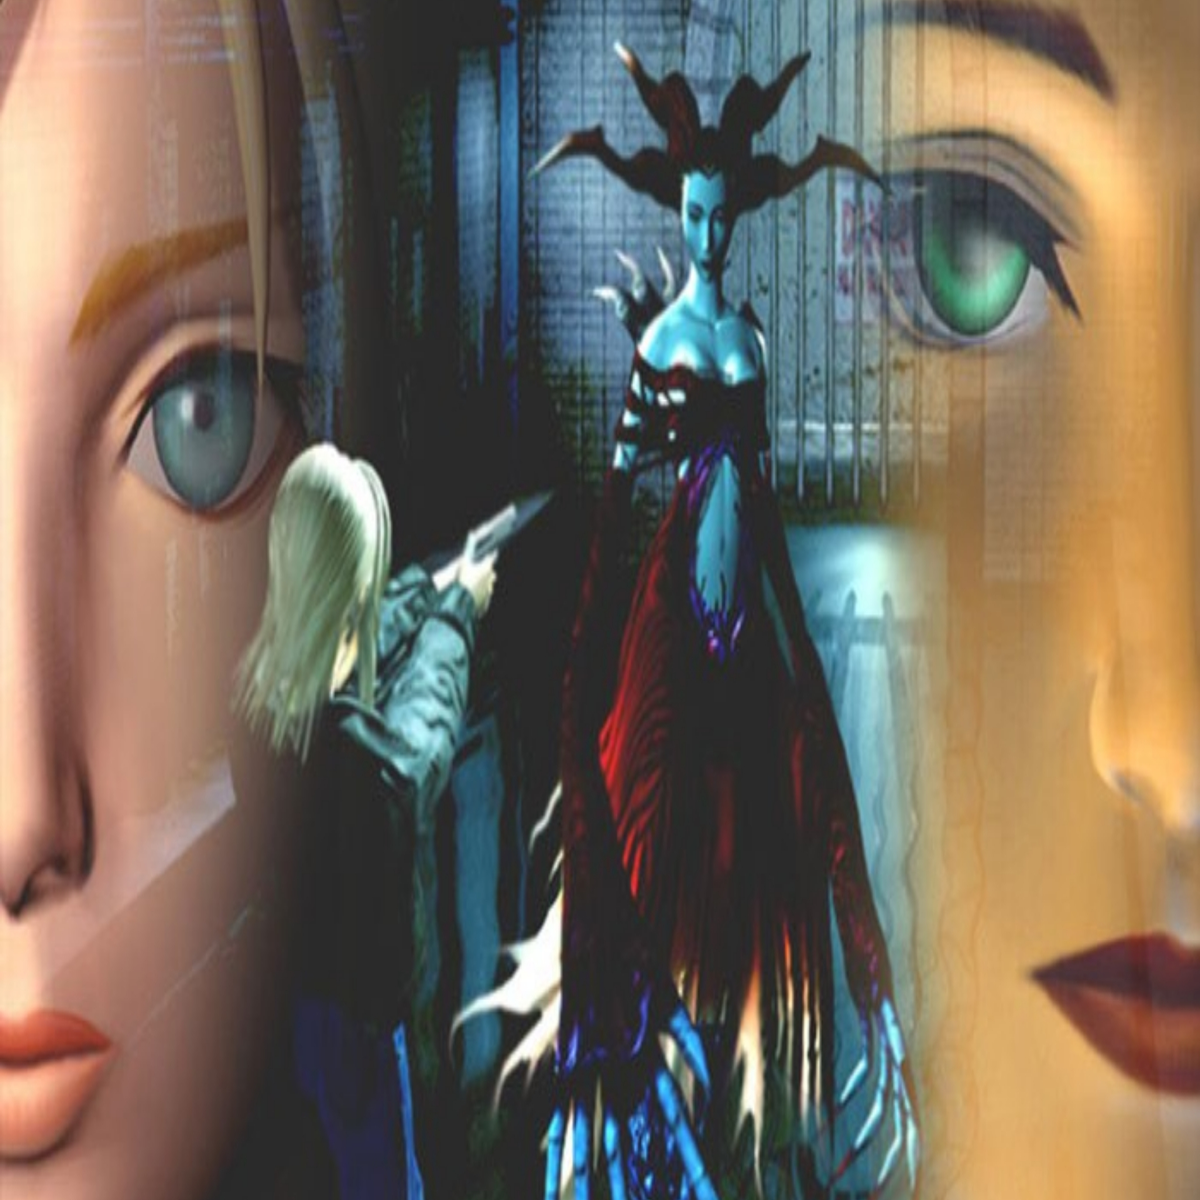 FF7R Producer Teases Parasite Eve Remake/Sequel Possible 